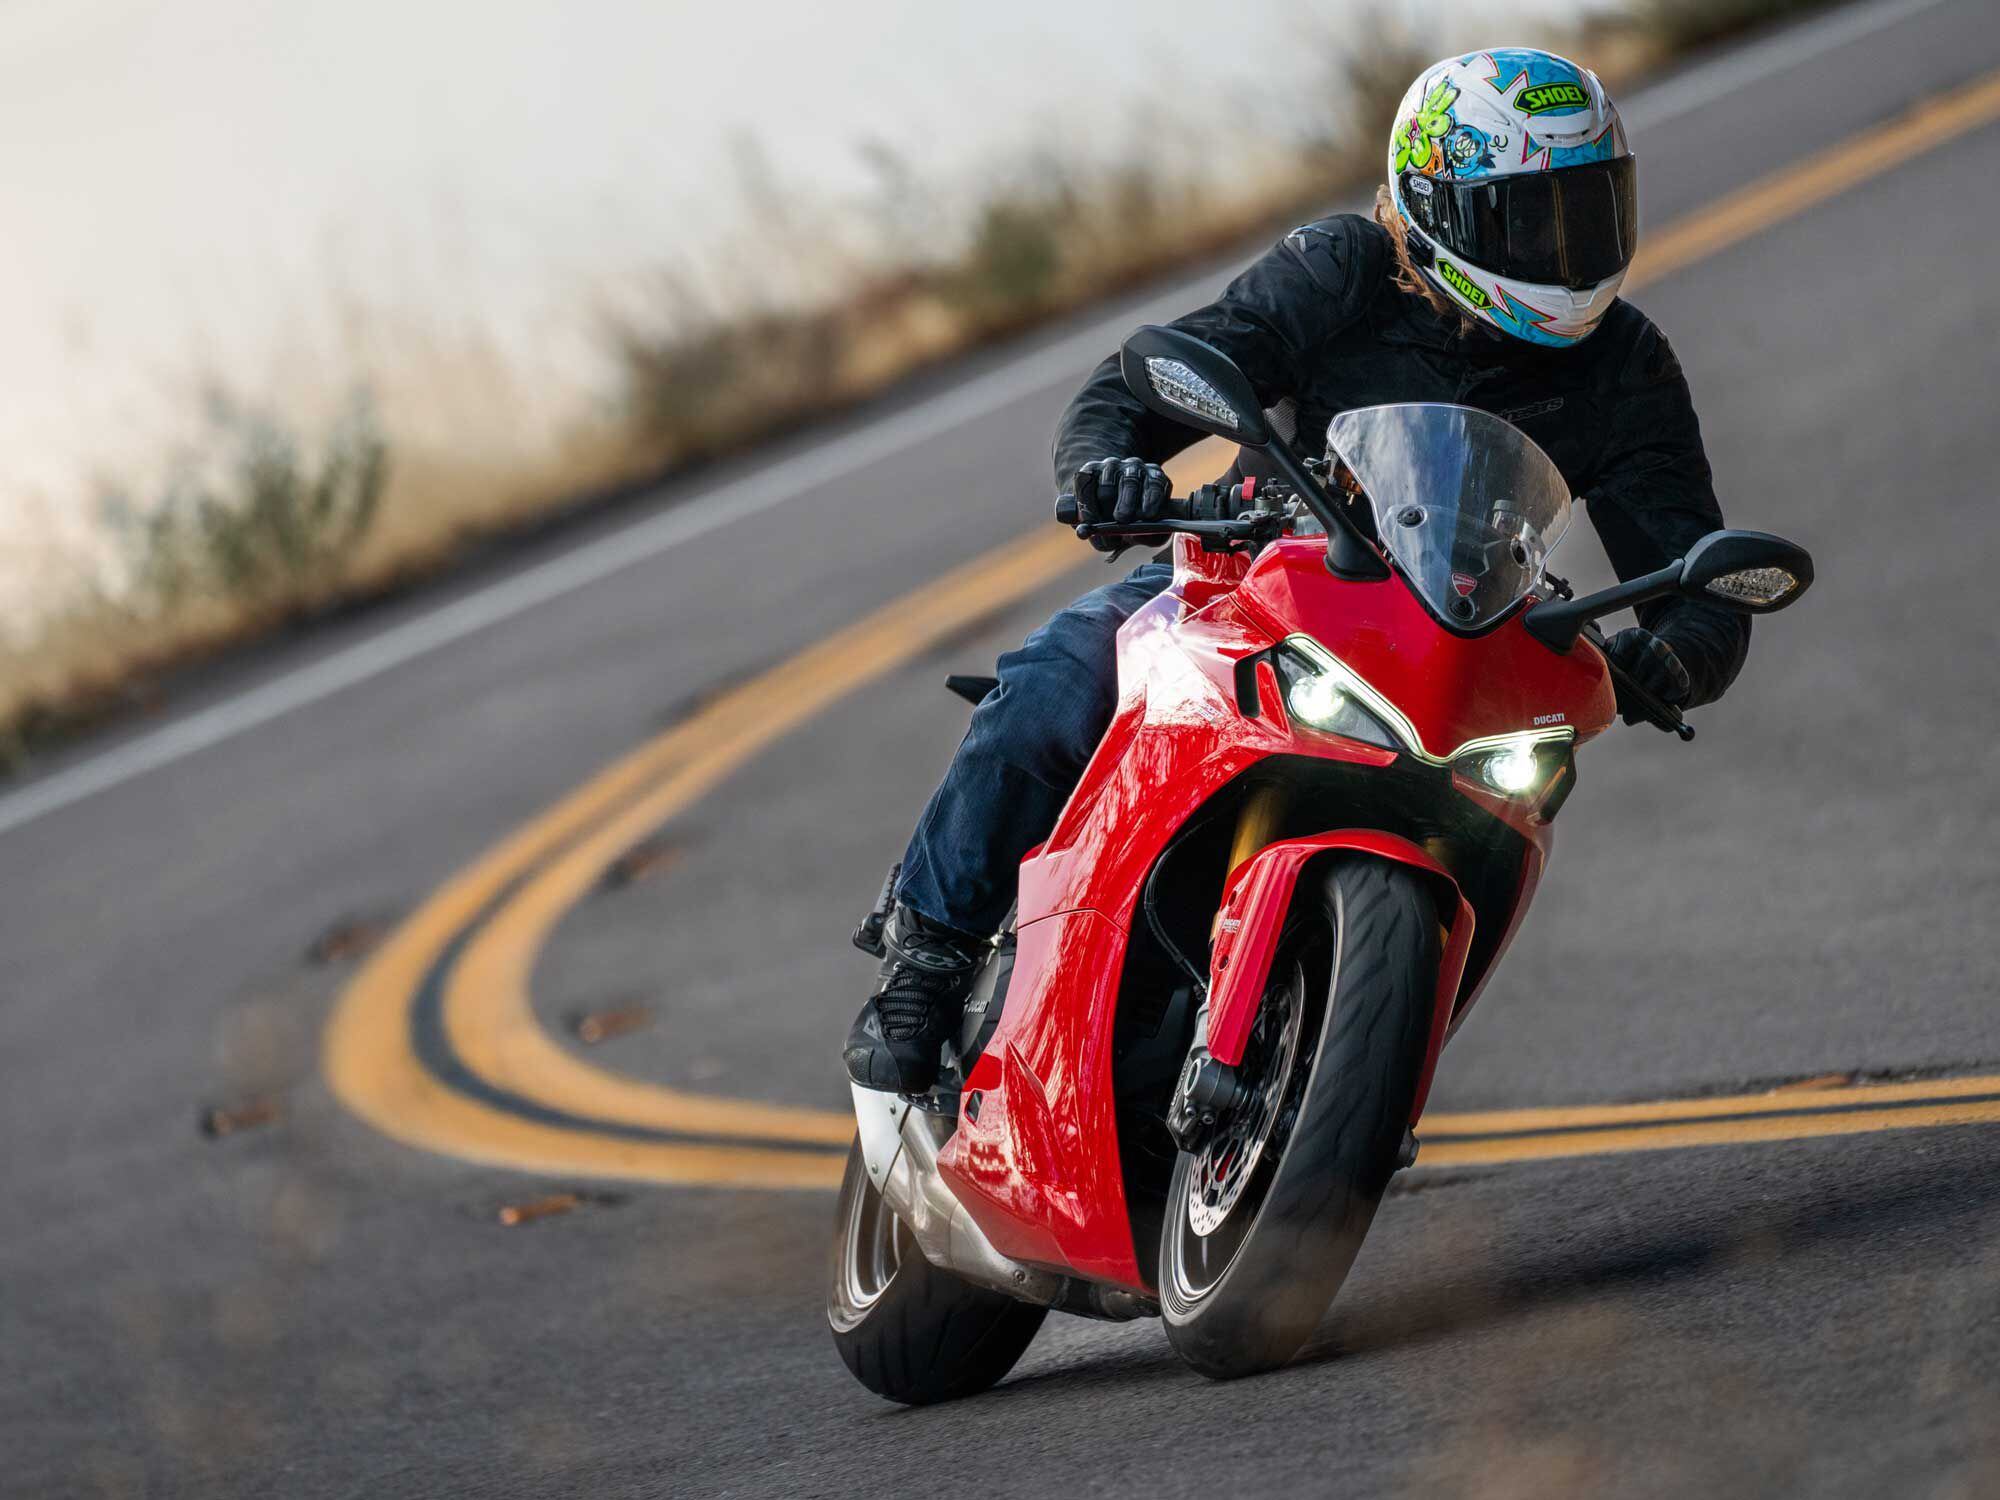 Considering how touring-friendly the SuperSport is, it should offer a larger-capacity fuel tank and cruise control.